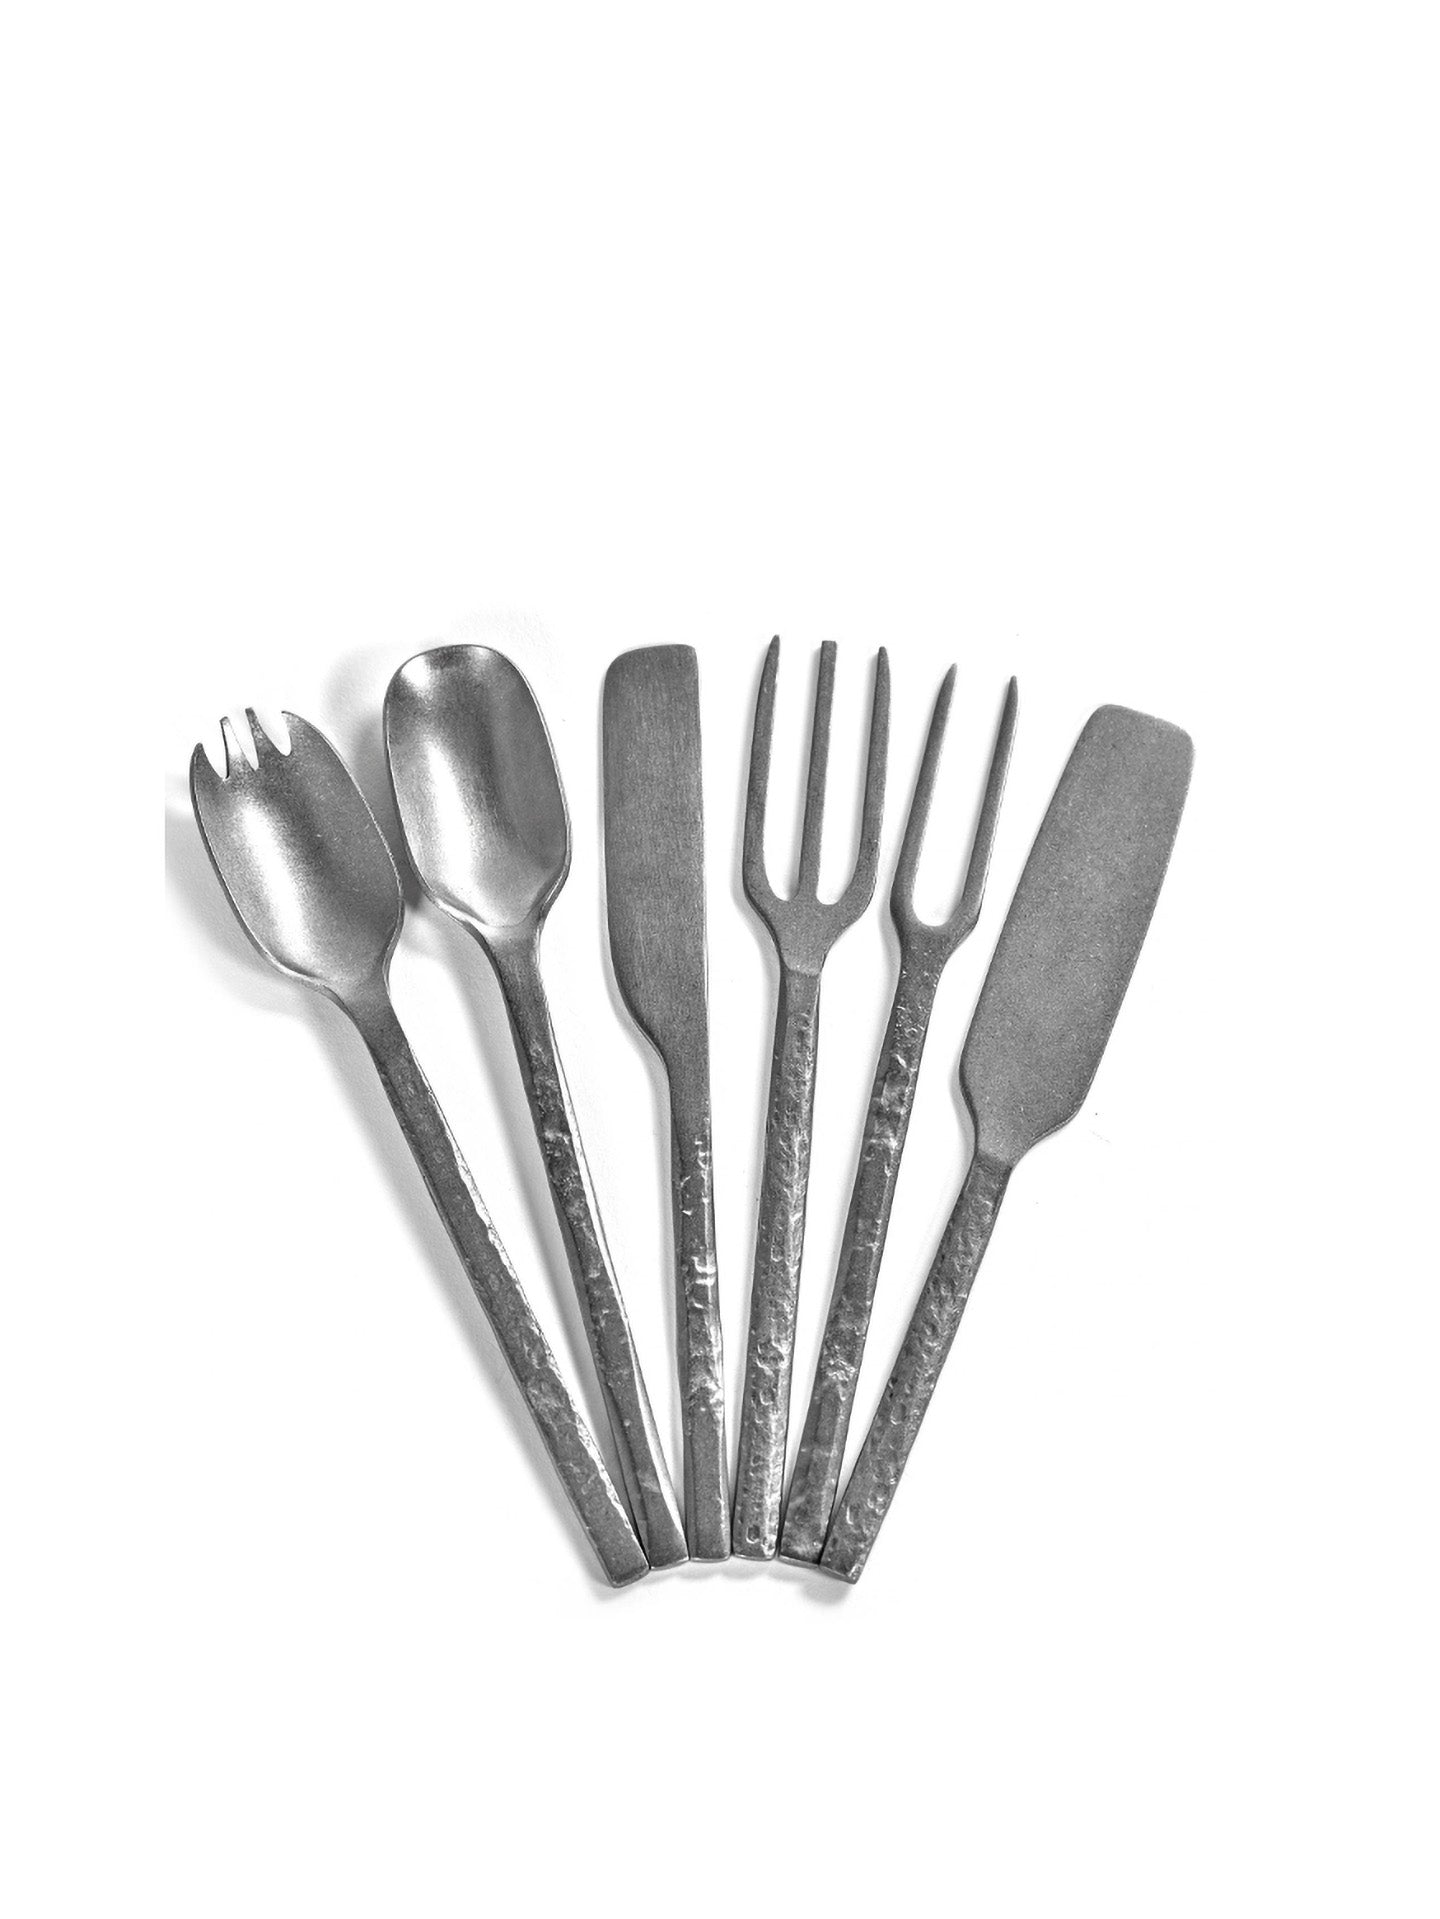 The cutlery collection have stonewashed texture but they are dishwasher safe.